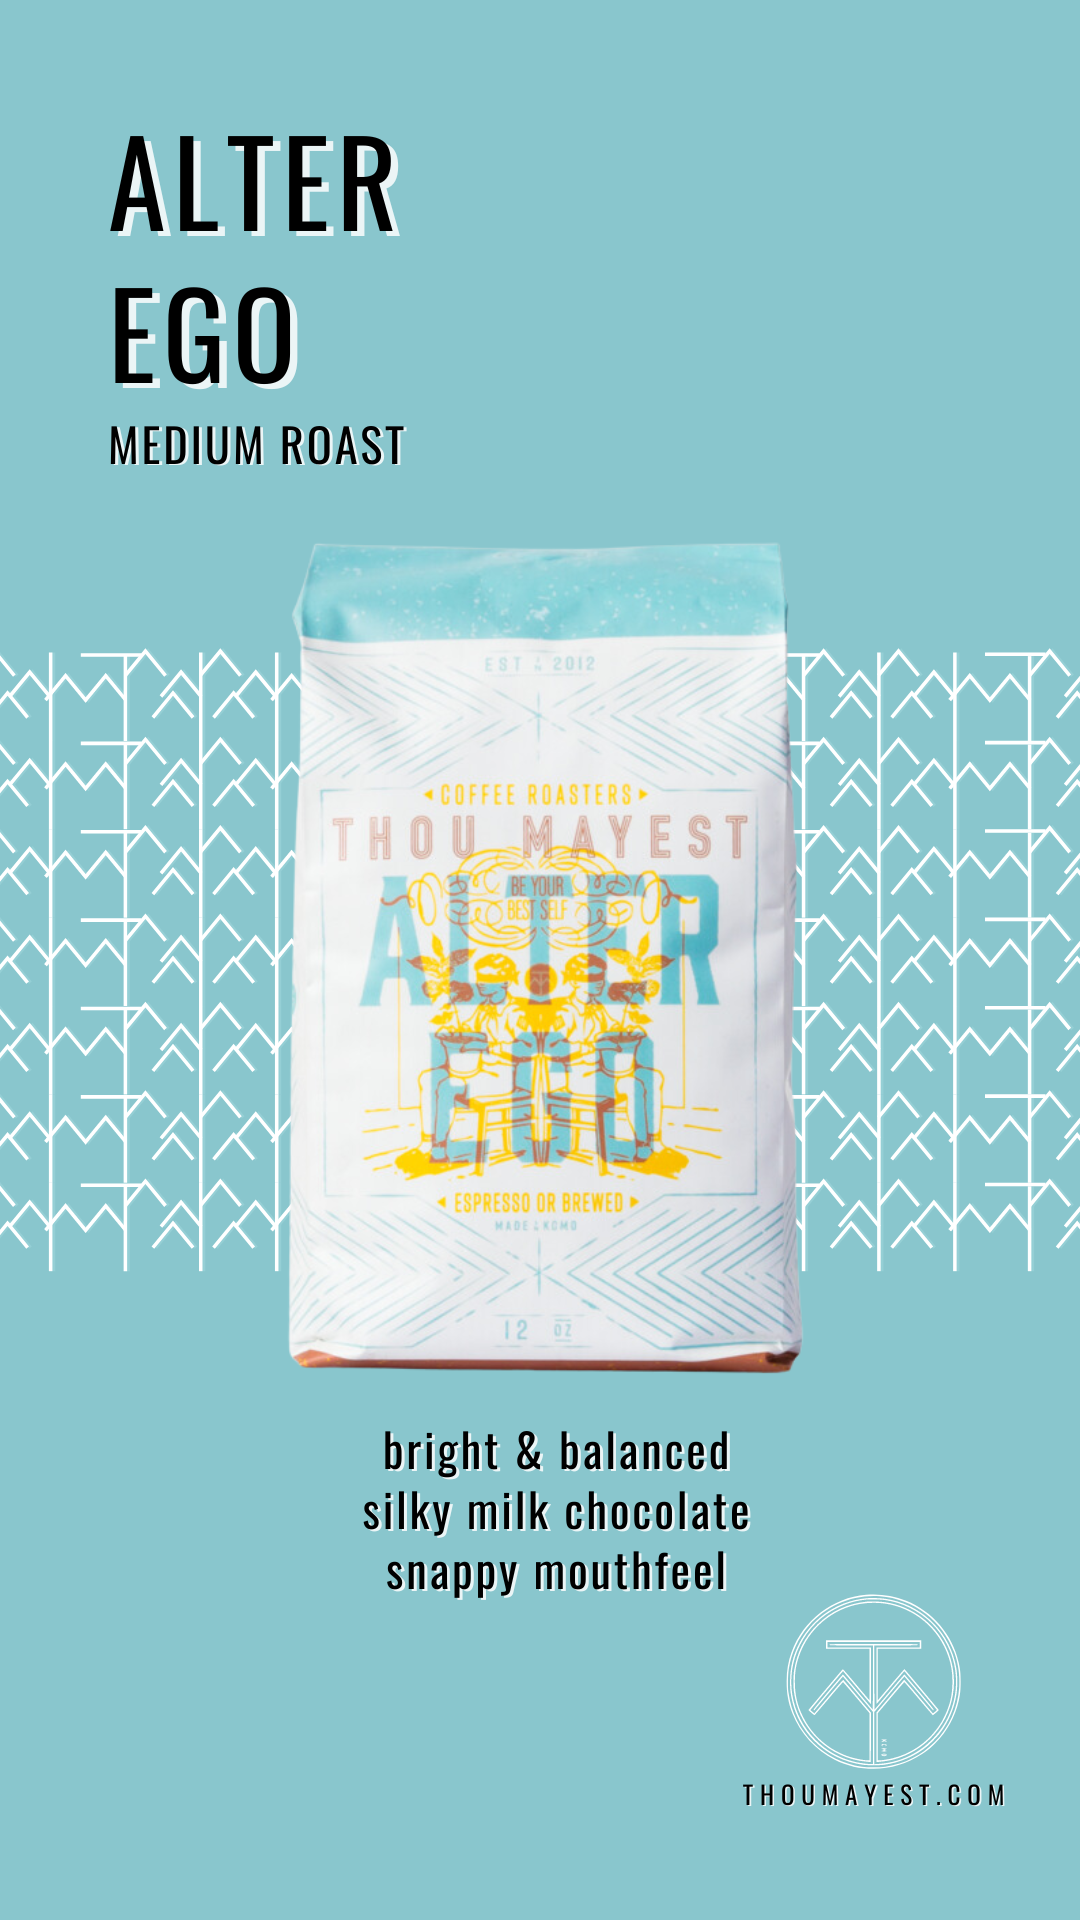 Image of Alter Ego 12oz bag of coffee with description: Medium roast. Bright &amp; Balanced. Silky Milk Chocolate. Snappy Mouthfeel. 